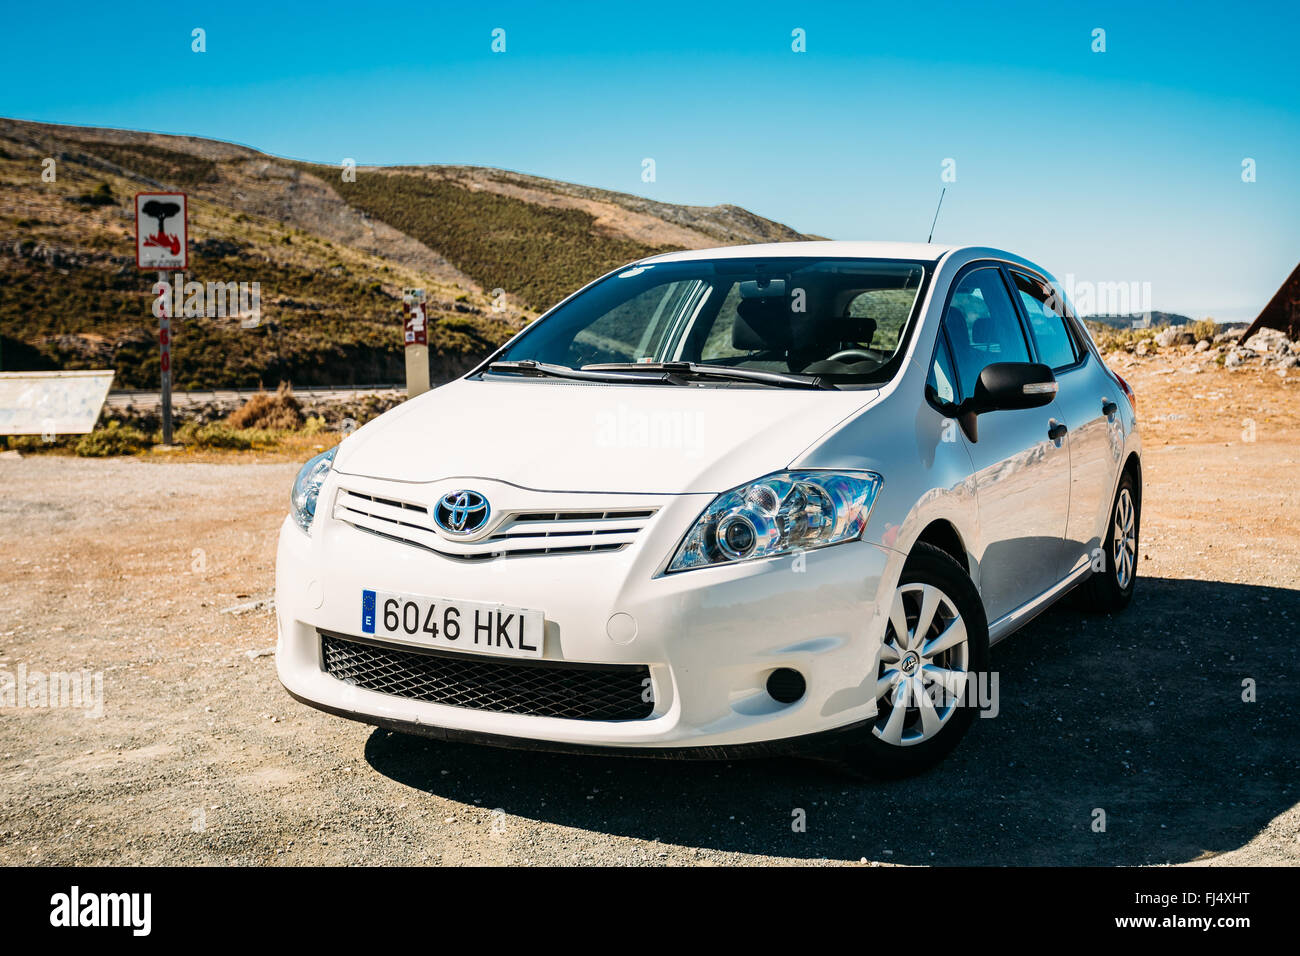 White color Toyota Auris car on Spain nature landscape. The Toyota Auris is  a compact hatchback derived from the Toyota Corolla Stock Photo - Alamy